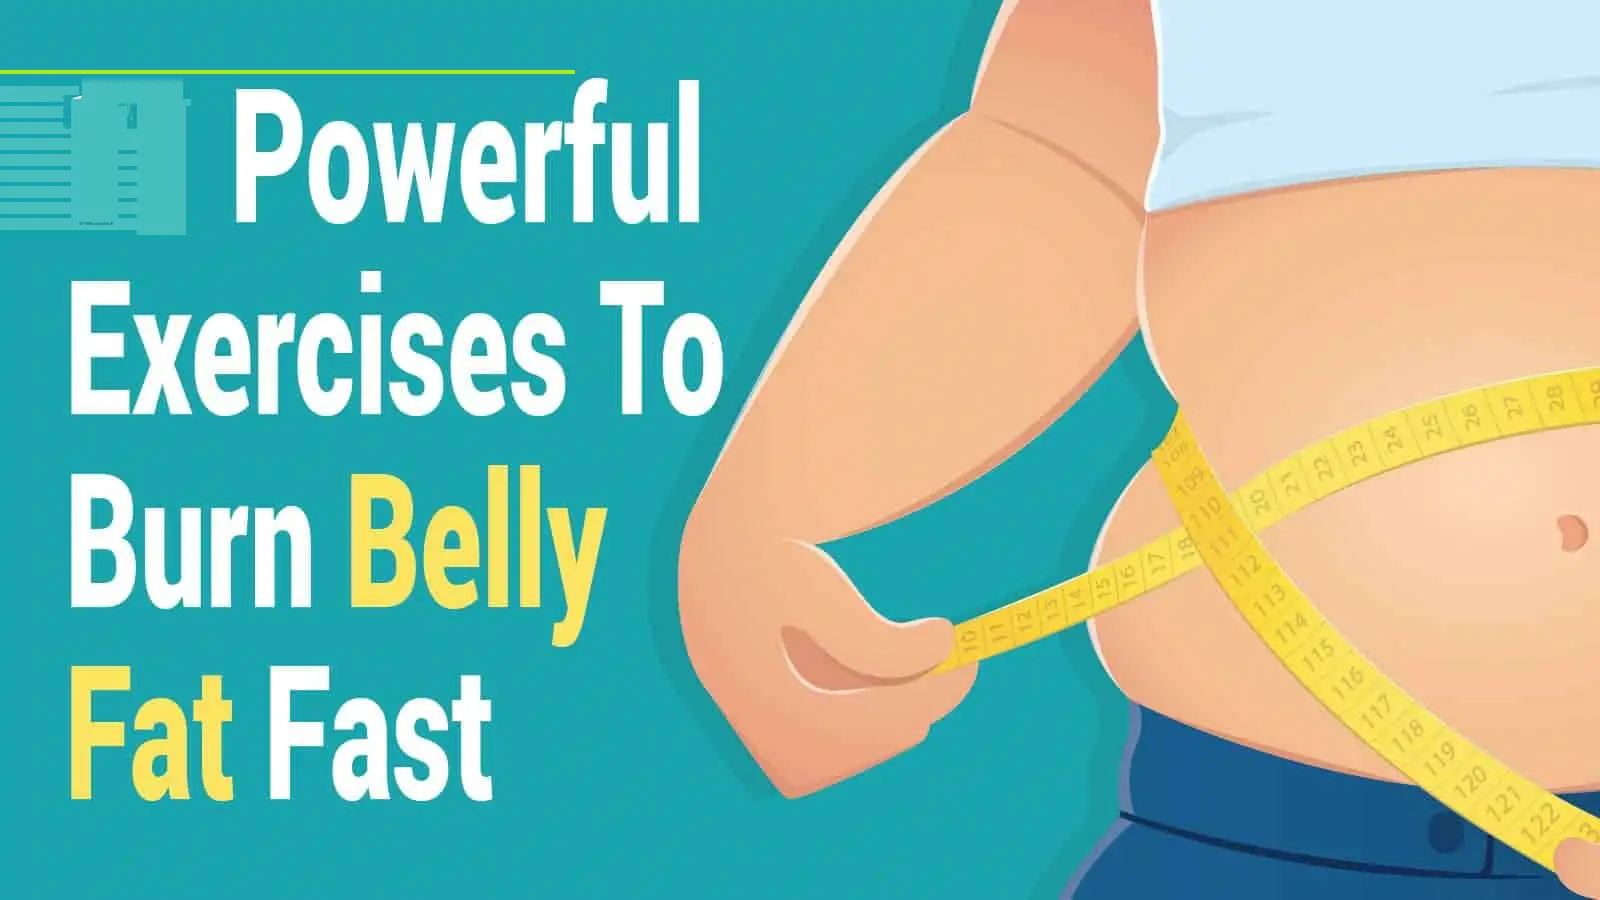 Dance as Cardio: The Ultimate Guide to Losing Belly Fat